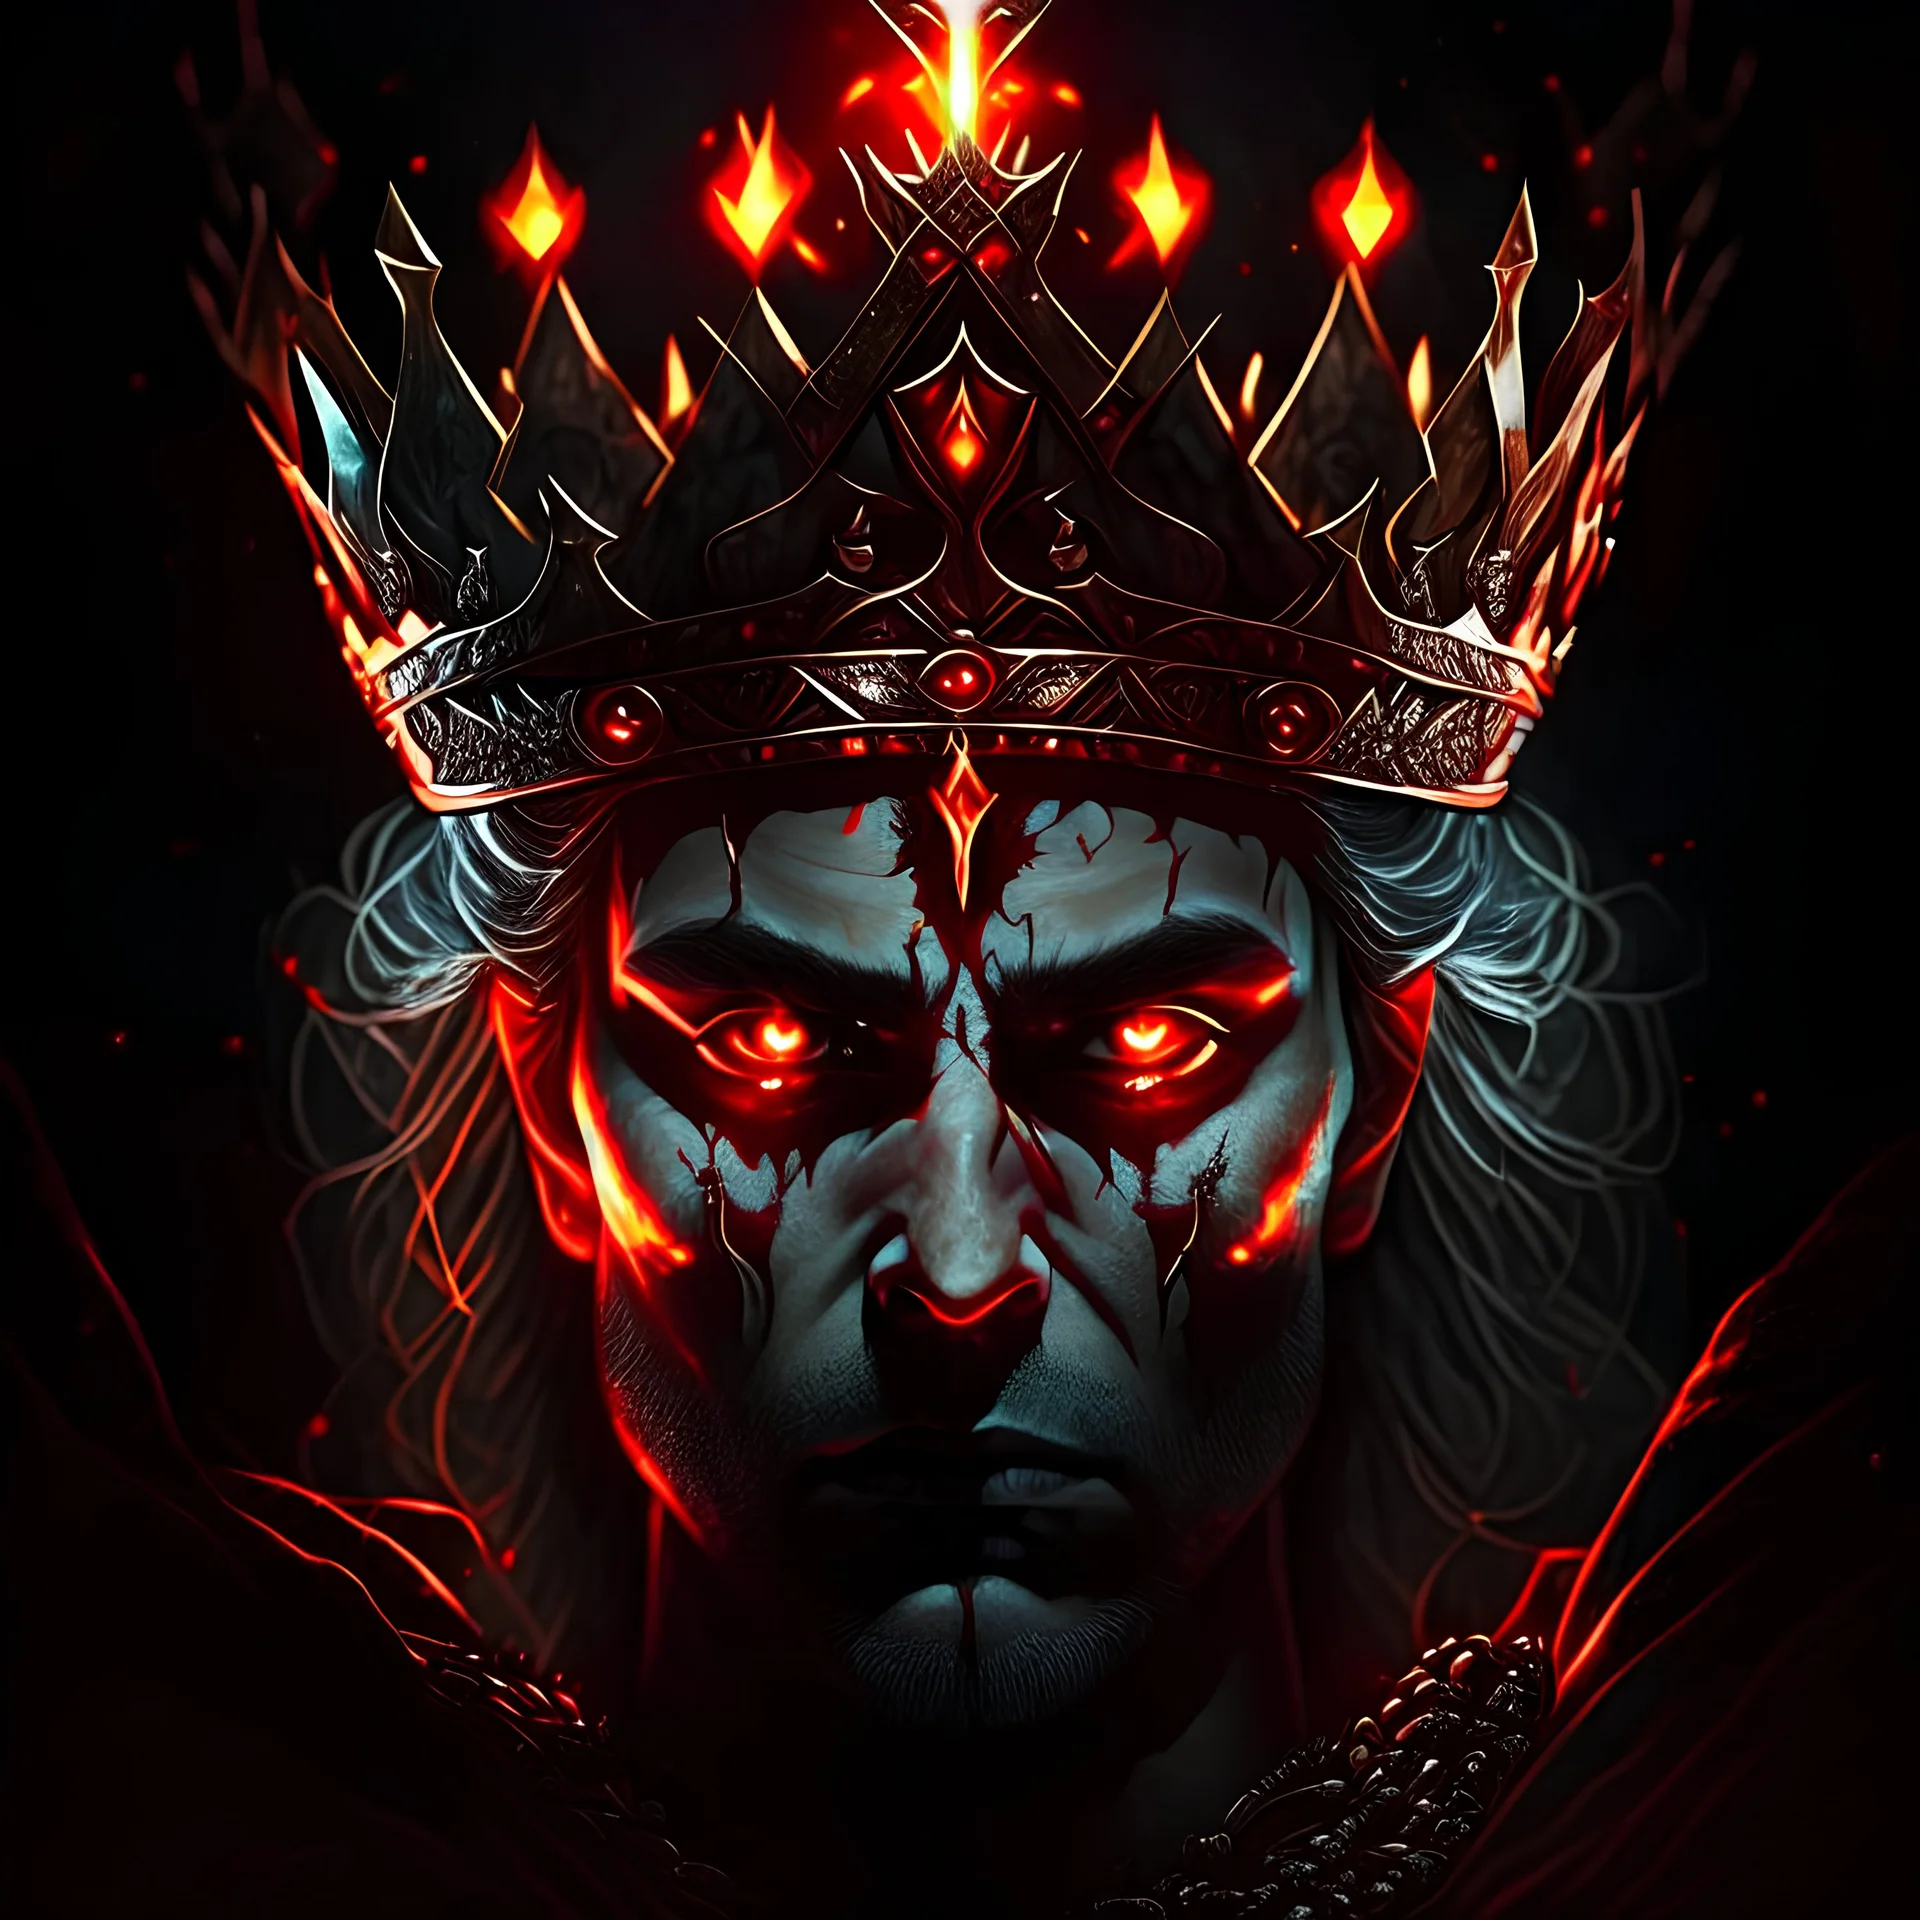 King with crown, Possessed, Glowing eyes,